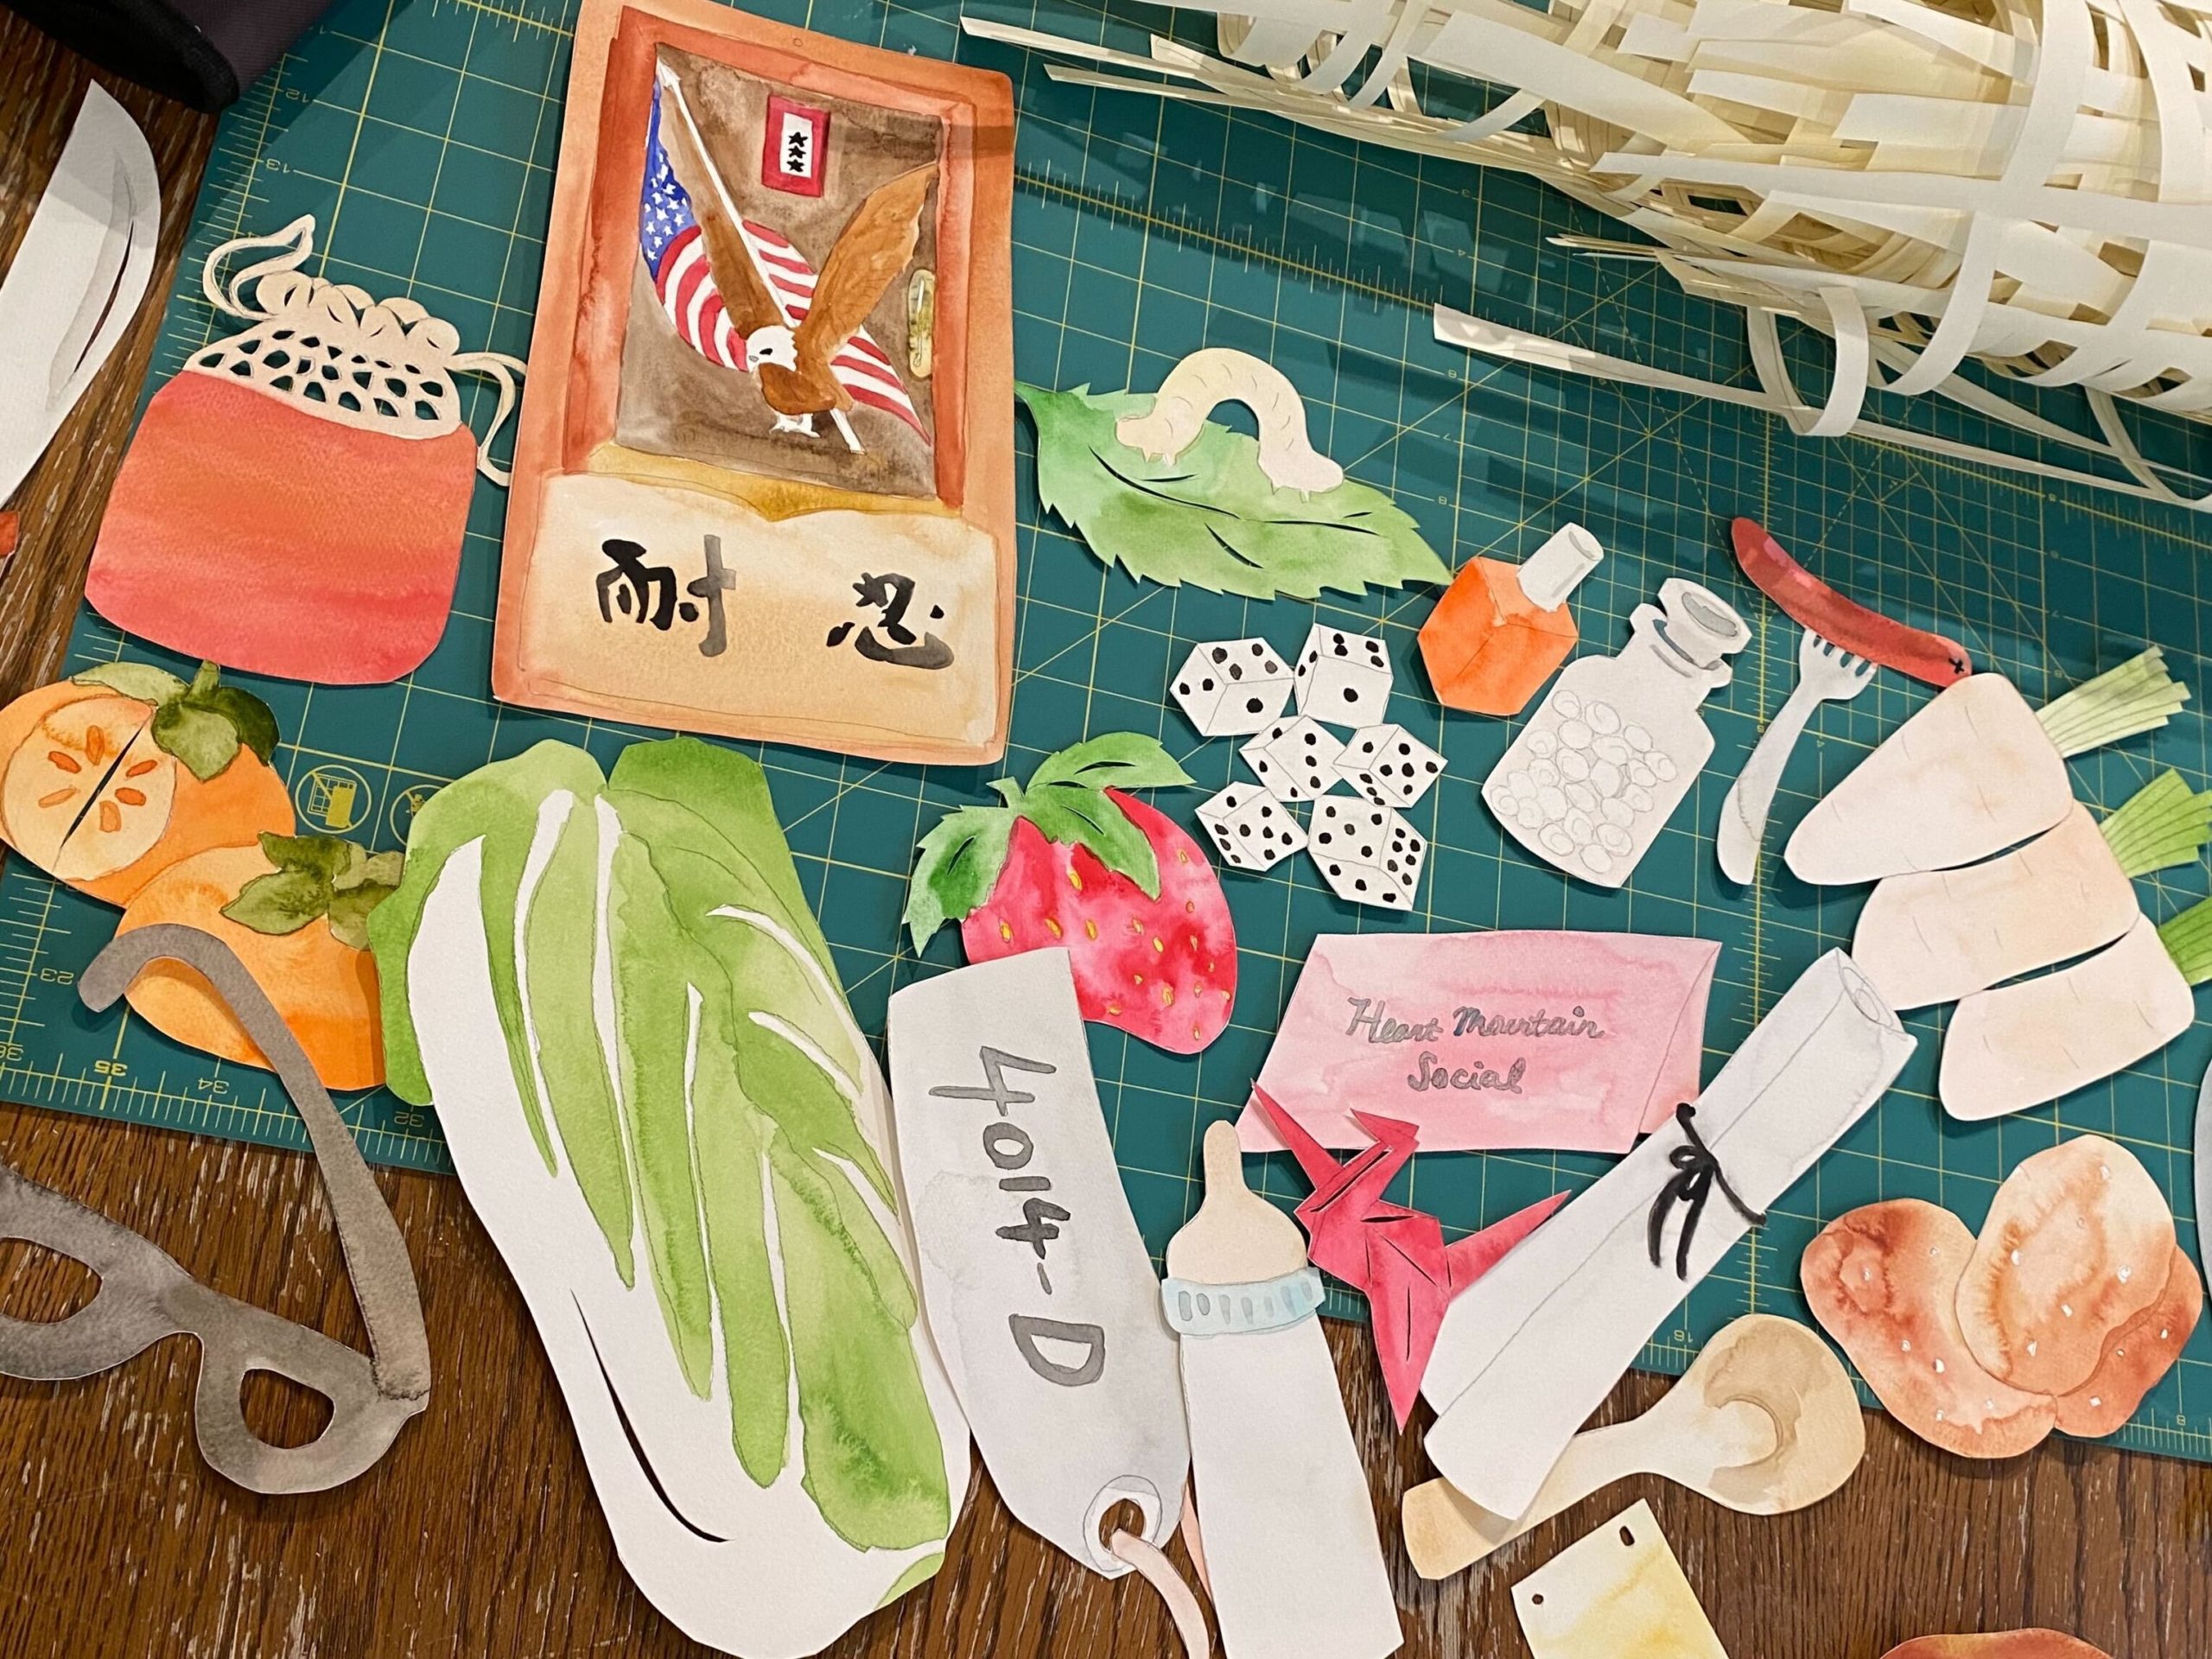 Objects cut from paper and painted in watercolor, laid out on a table before being added to the memory net. Some of the objects include a head of napa cabbage, an evacuation tag, origami crane, wooden rice paddle, baby bottle, and a silkworm on a mulberry leaf.